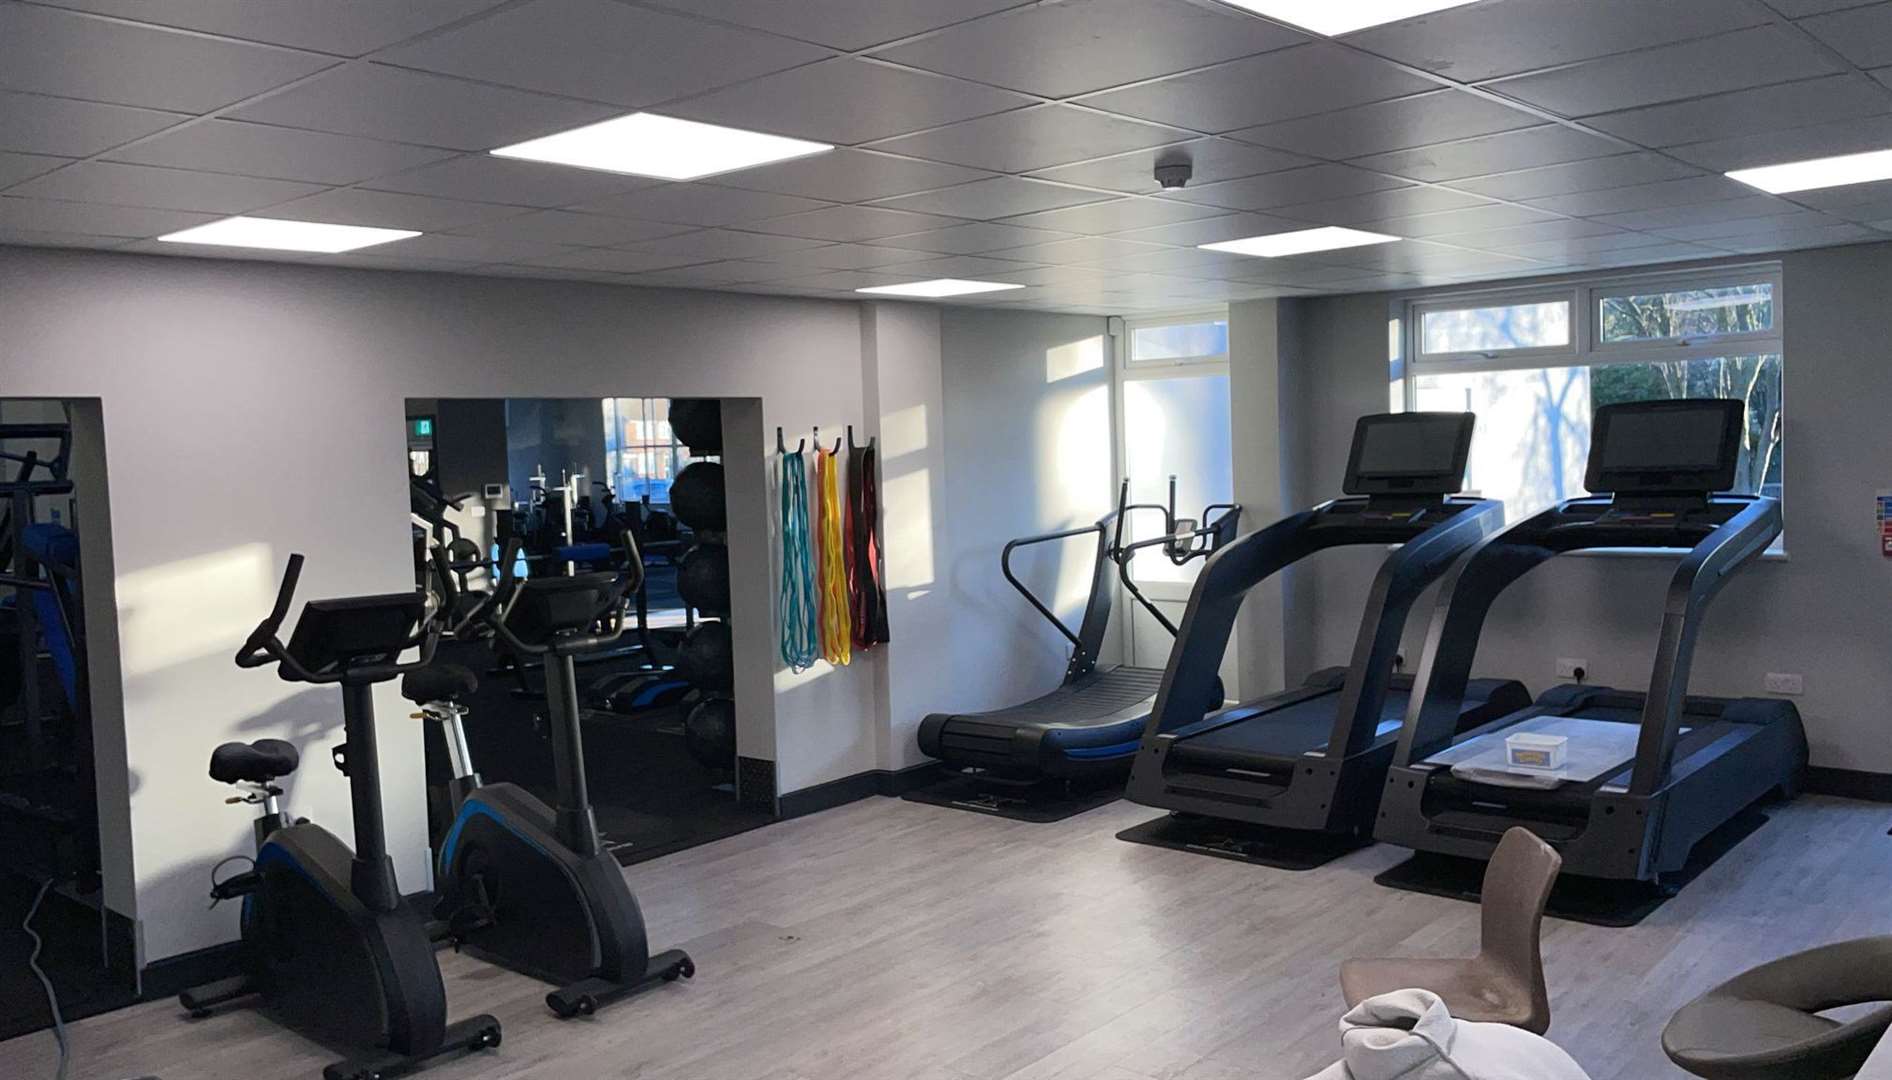 Cardio Room at the newly refurbished Europa Weightlifting Gym in Temple Hill, Dartford. Photo credit: Andrew Callard